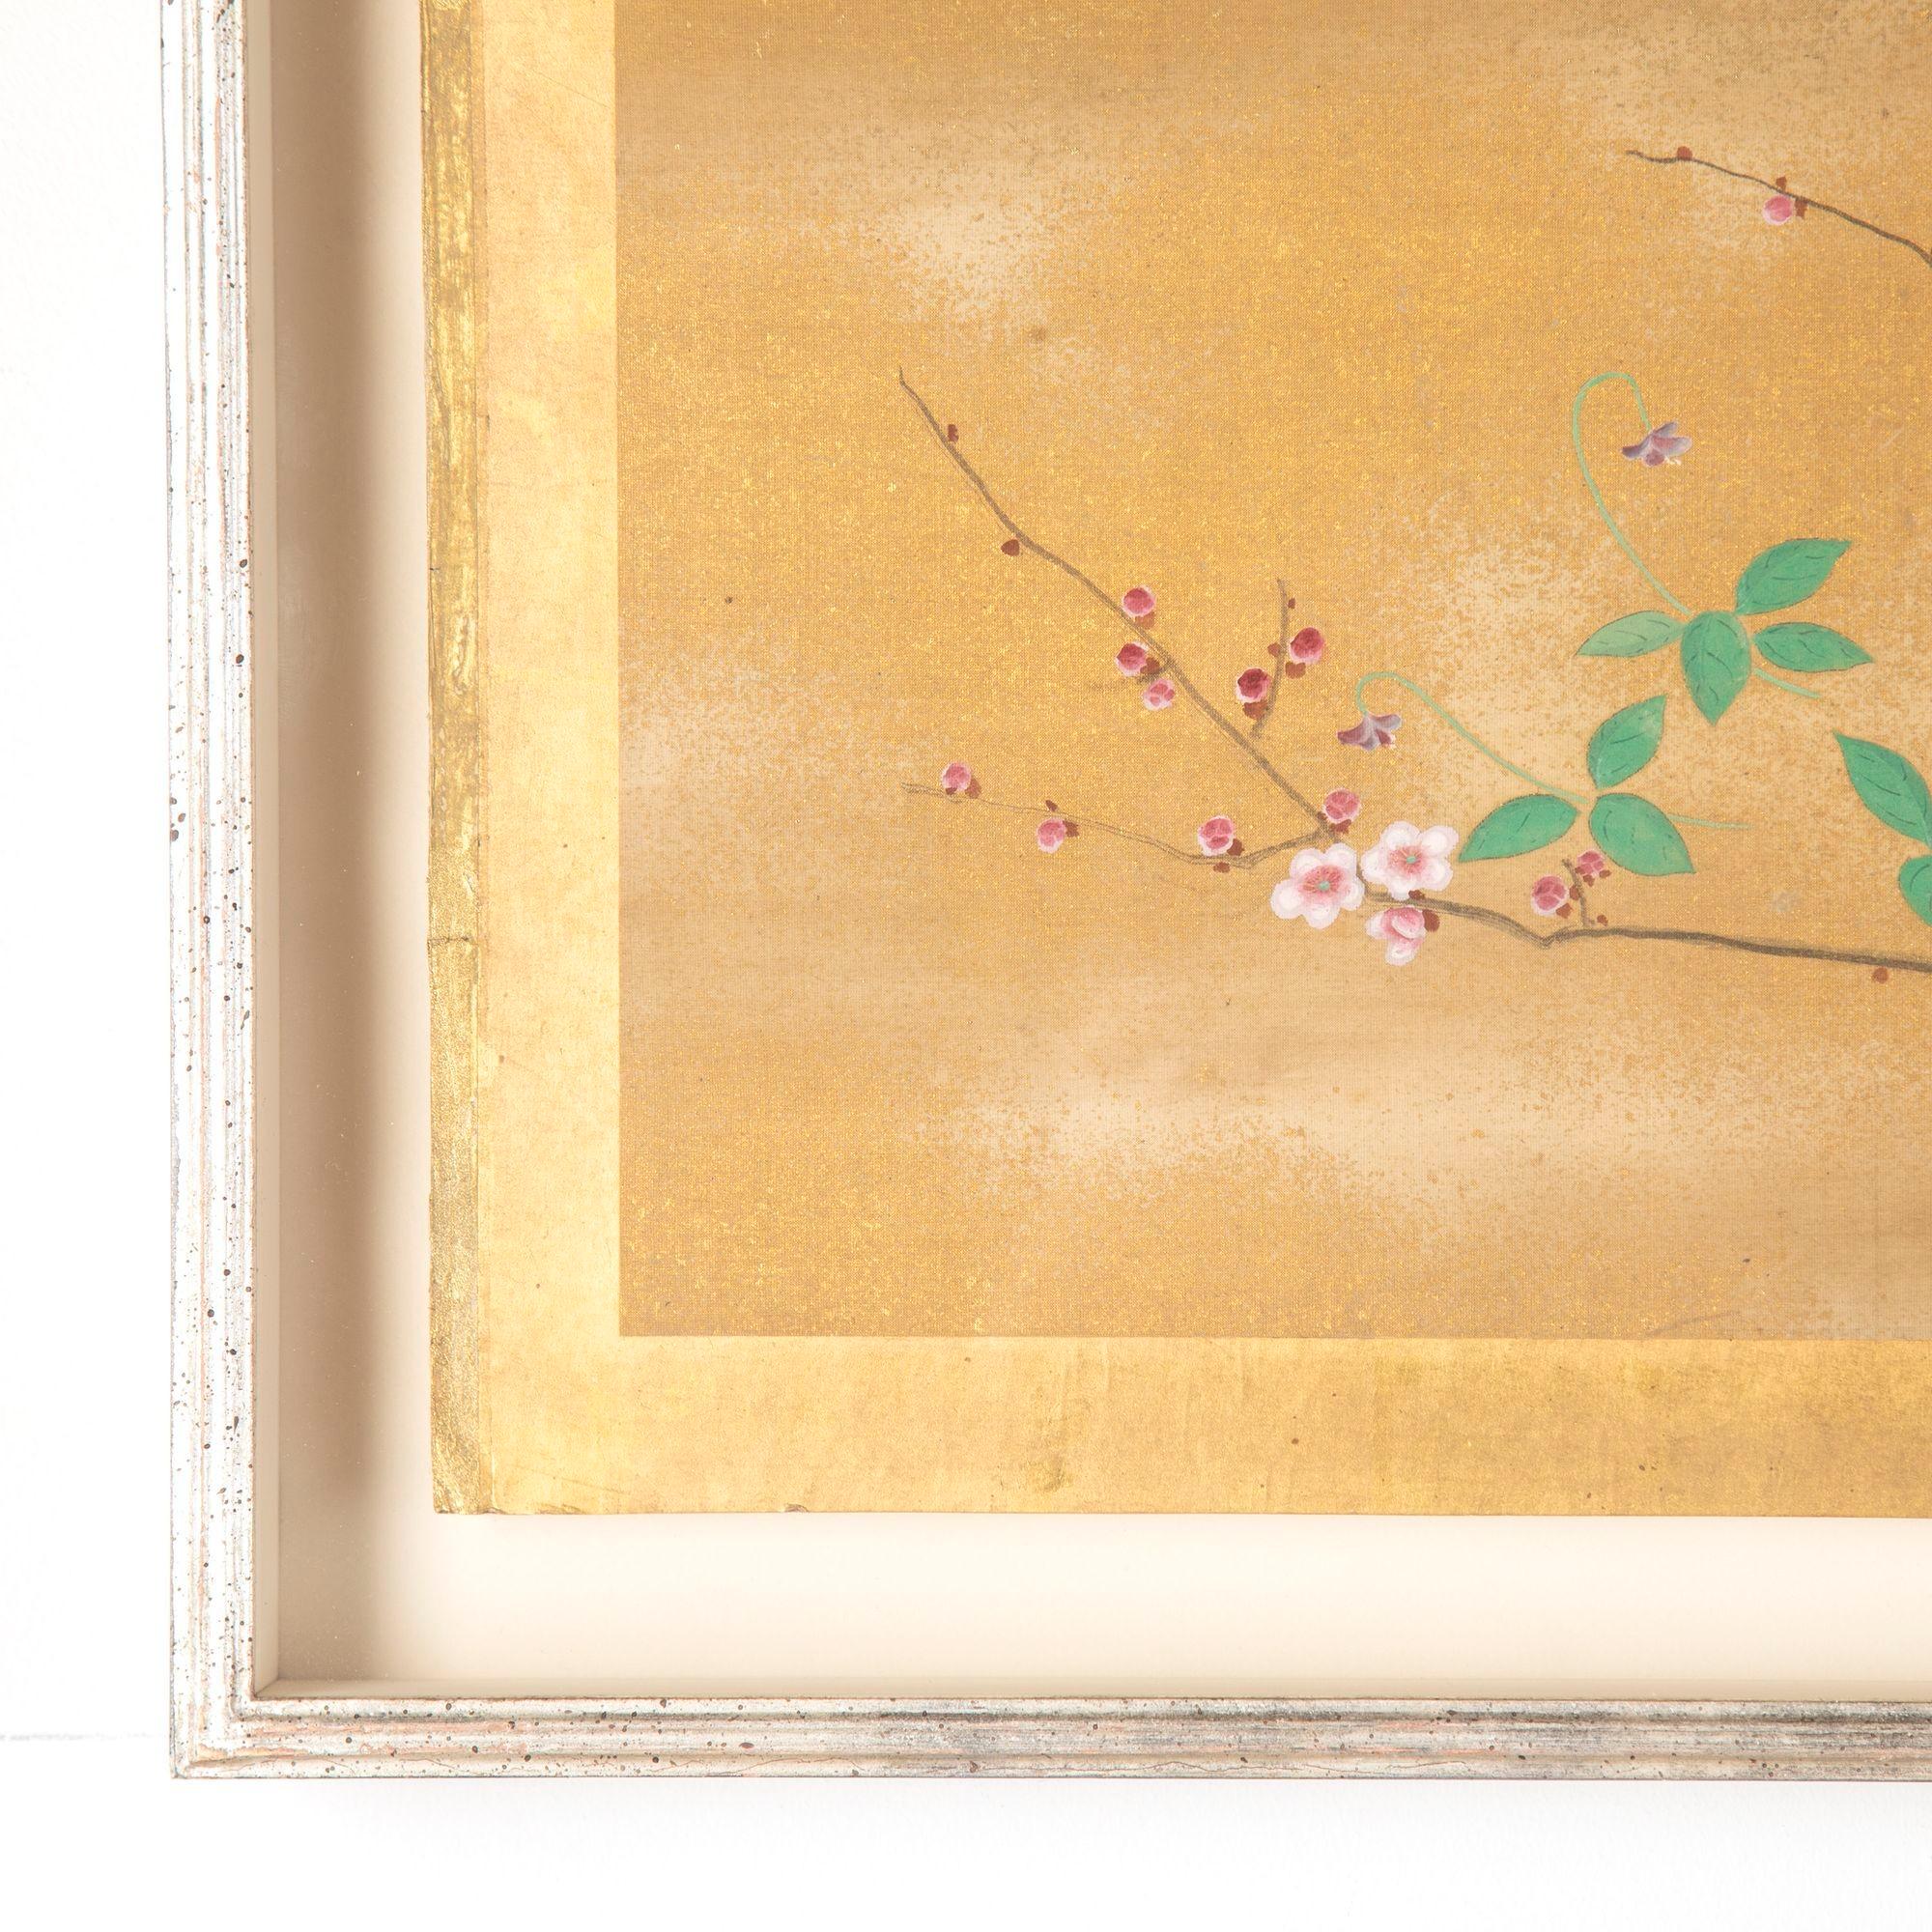 Set of six 19th Century Japanese Kano school paintings, circa 1860.
These beautiful ink watercolour paintings are done on a gold silk ground, depicting birds, bats, flowers, insects, etc.
Perfect for bringing a sense of the outdoors into your